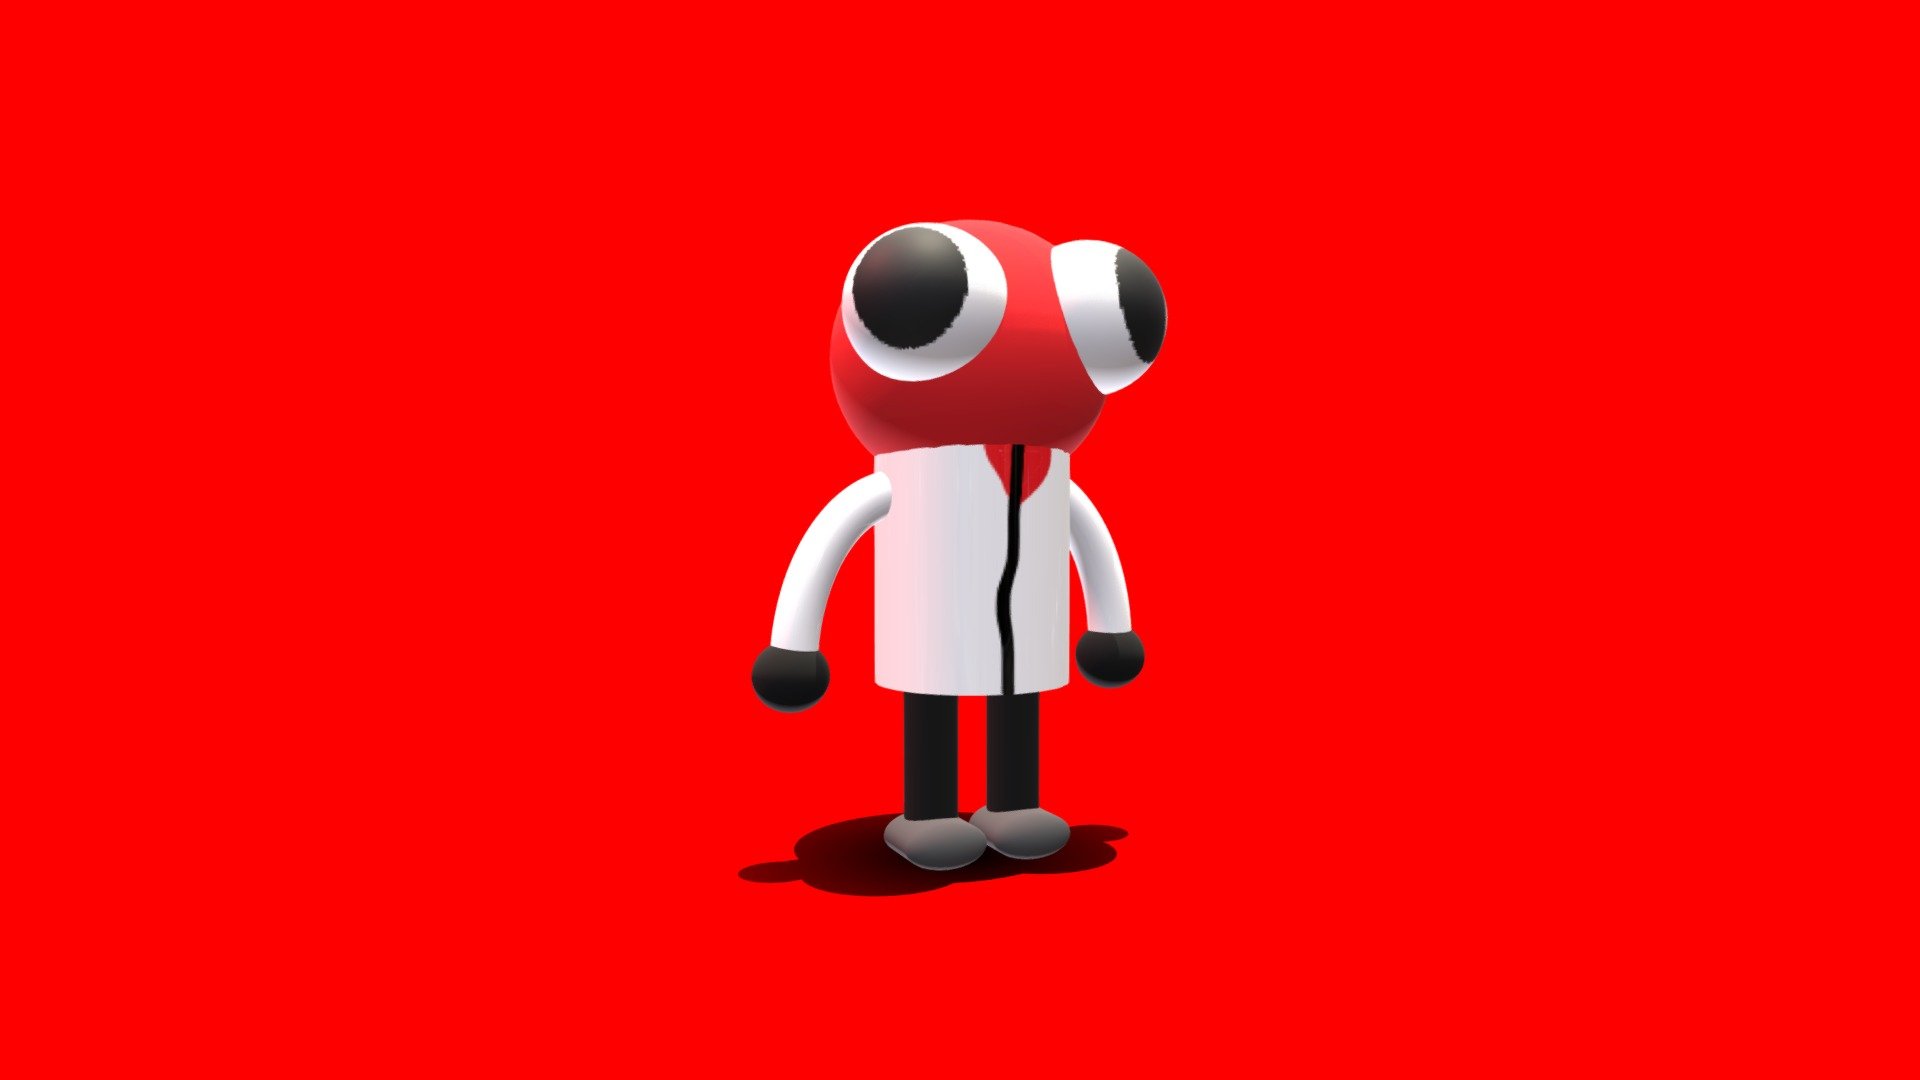 the scientist that created the friends is now littler
og game - Little Red - 3D model by robinsackboy0102 3d model